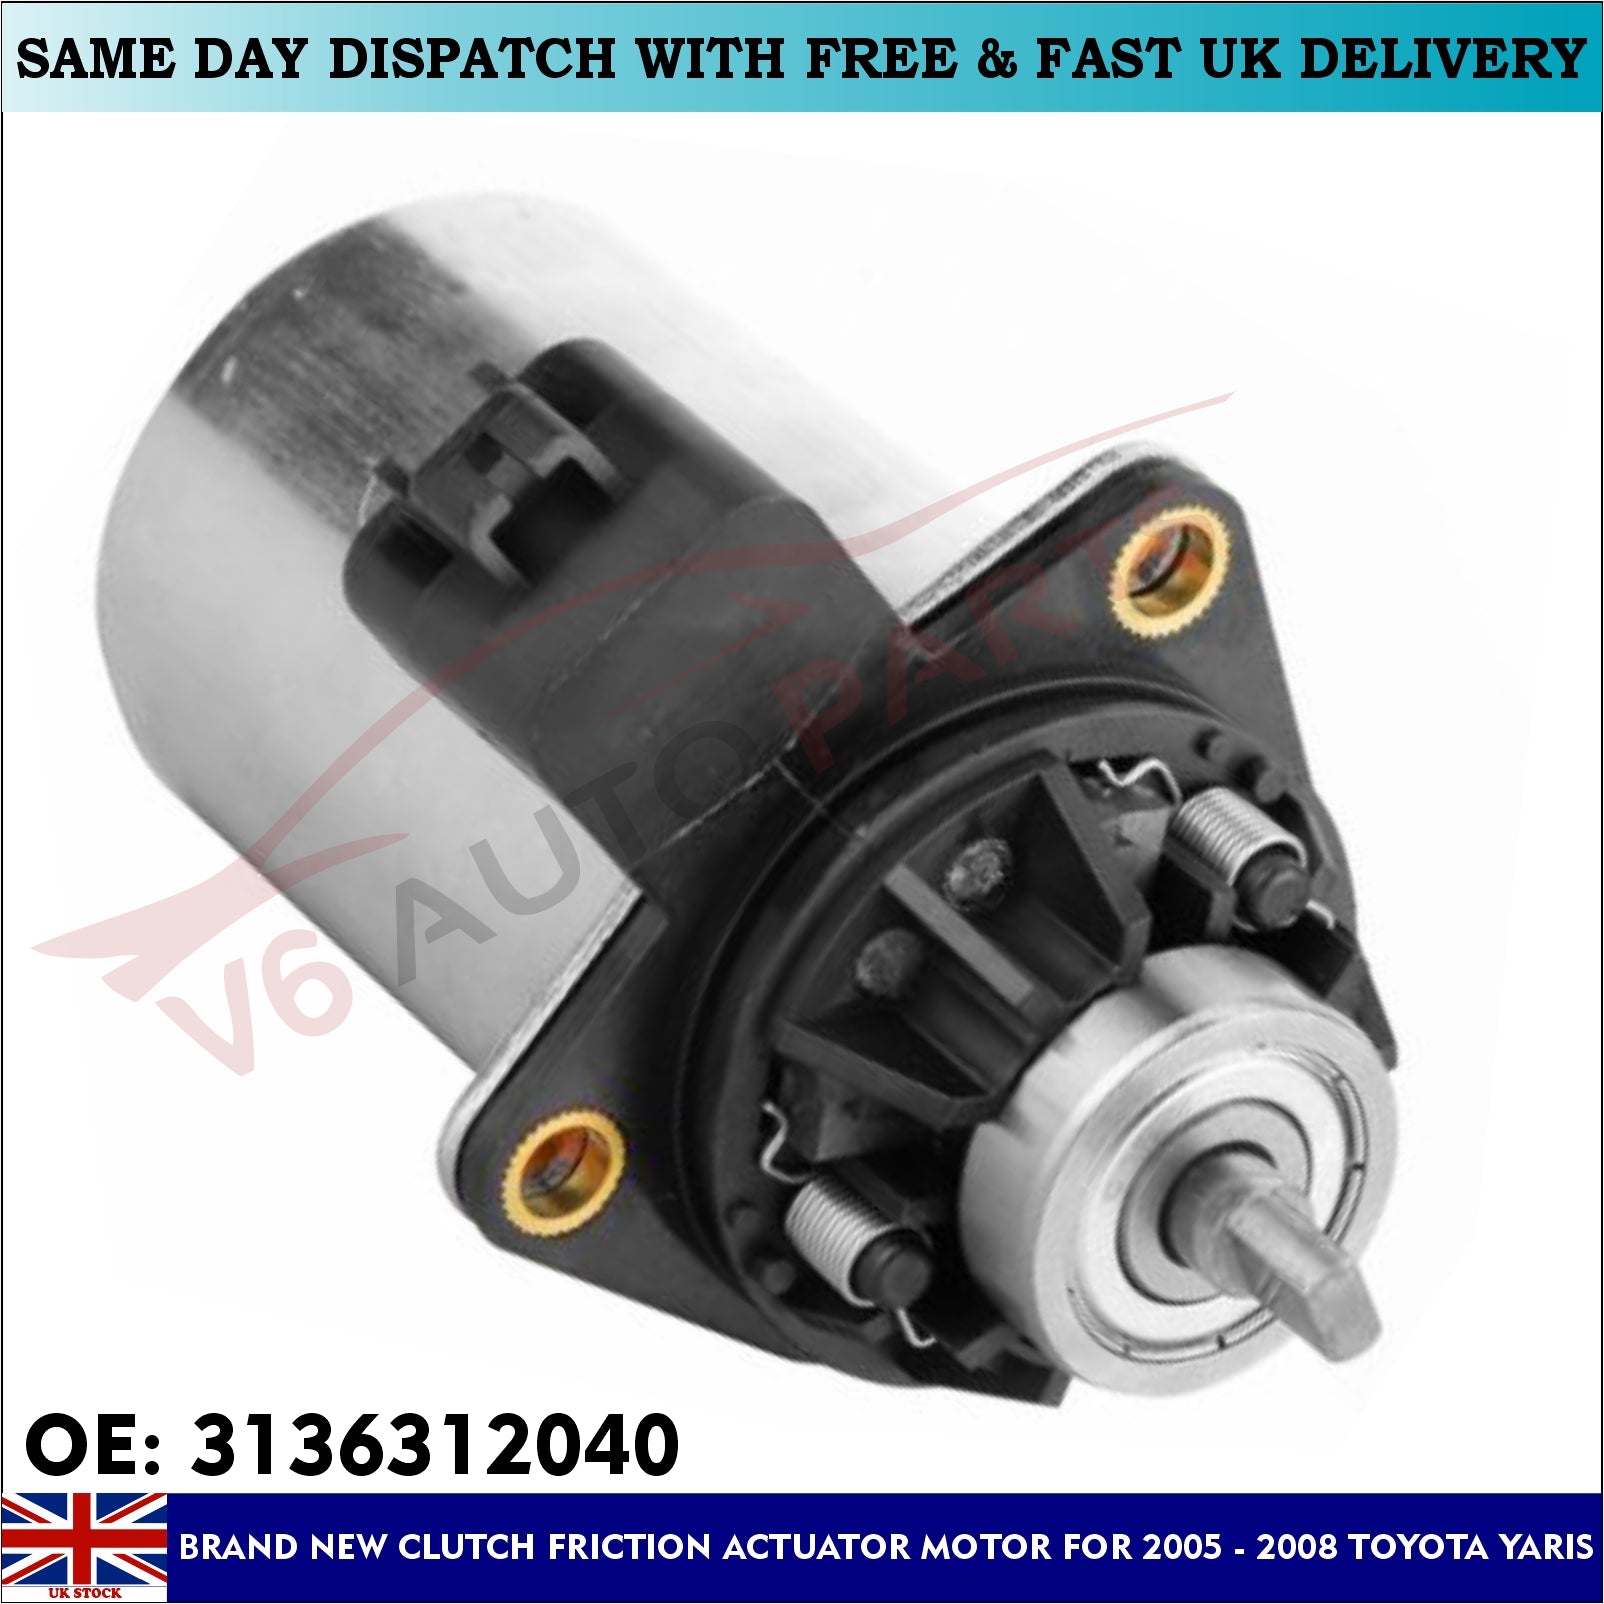 BRAND NEW CLUTCH FRICTION ACTUATOR MOTOR FOR TOYOTA AURIS COROLLA VERSO YARIS